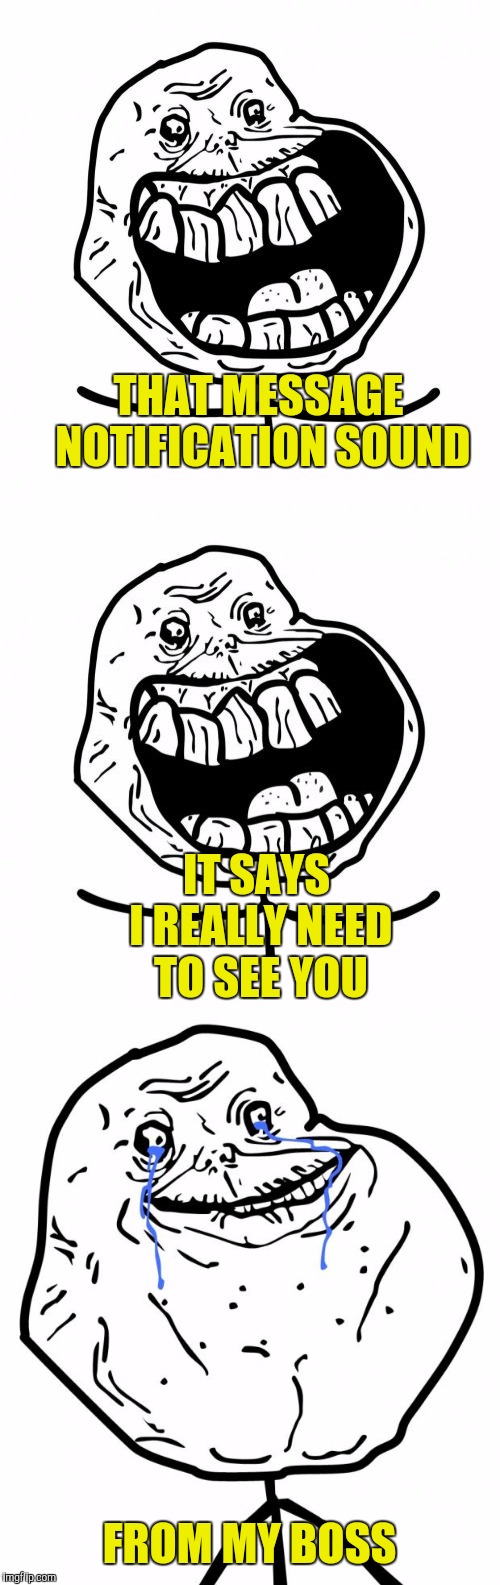  THAT MESSAGE NOTIFICATION SOUND; IT SAYS I REALLY NEED TO SEE YOU; FROM MY BOSS | image tagged in forever alone,forever alone happy,forever alone pun | made w/ Imgflip meme maker